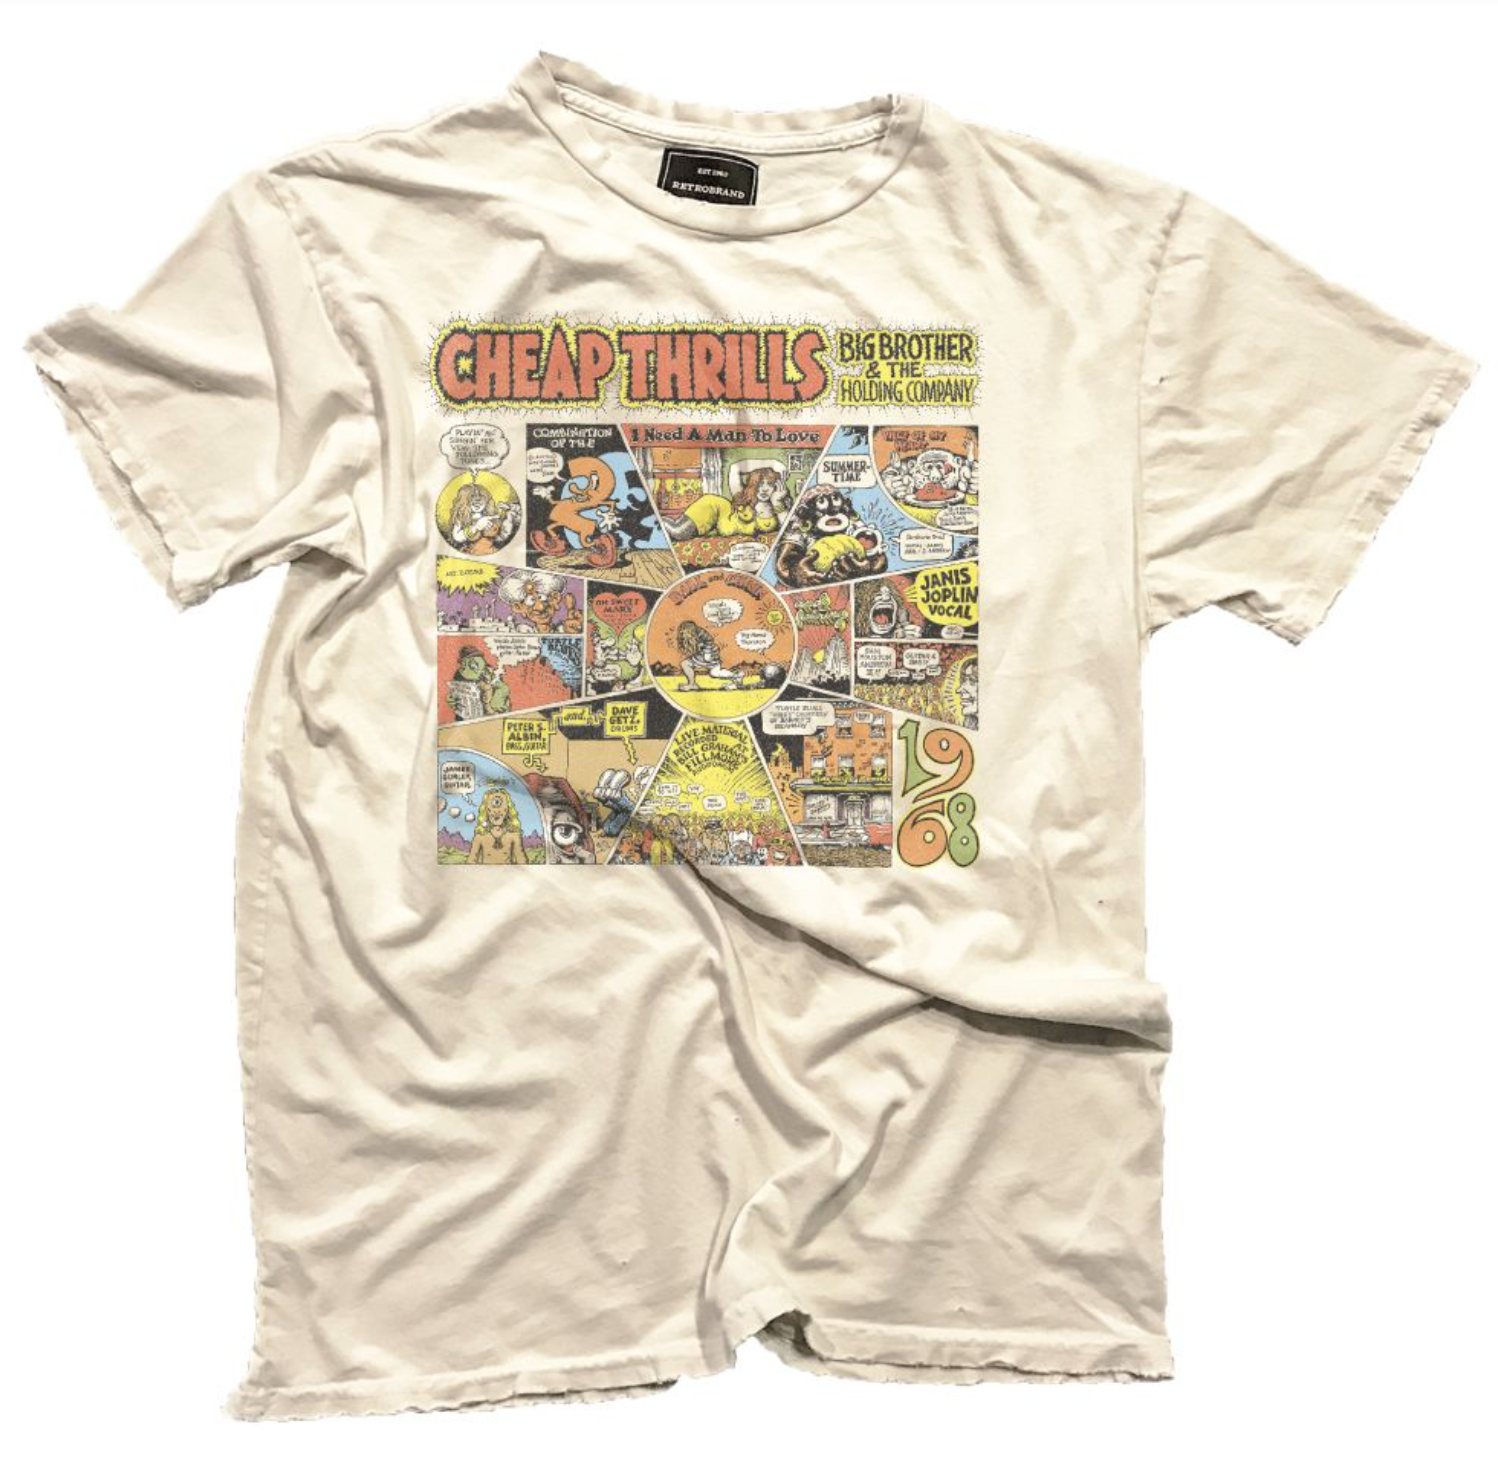 Cheap Thrills Big Brother & The Holding Company album cover on our antique white Black Label tee.